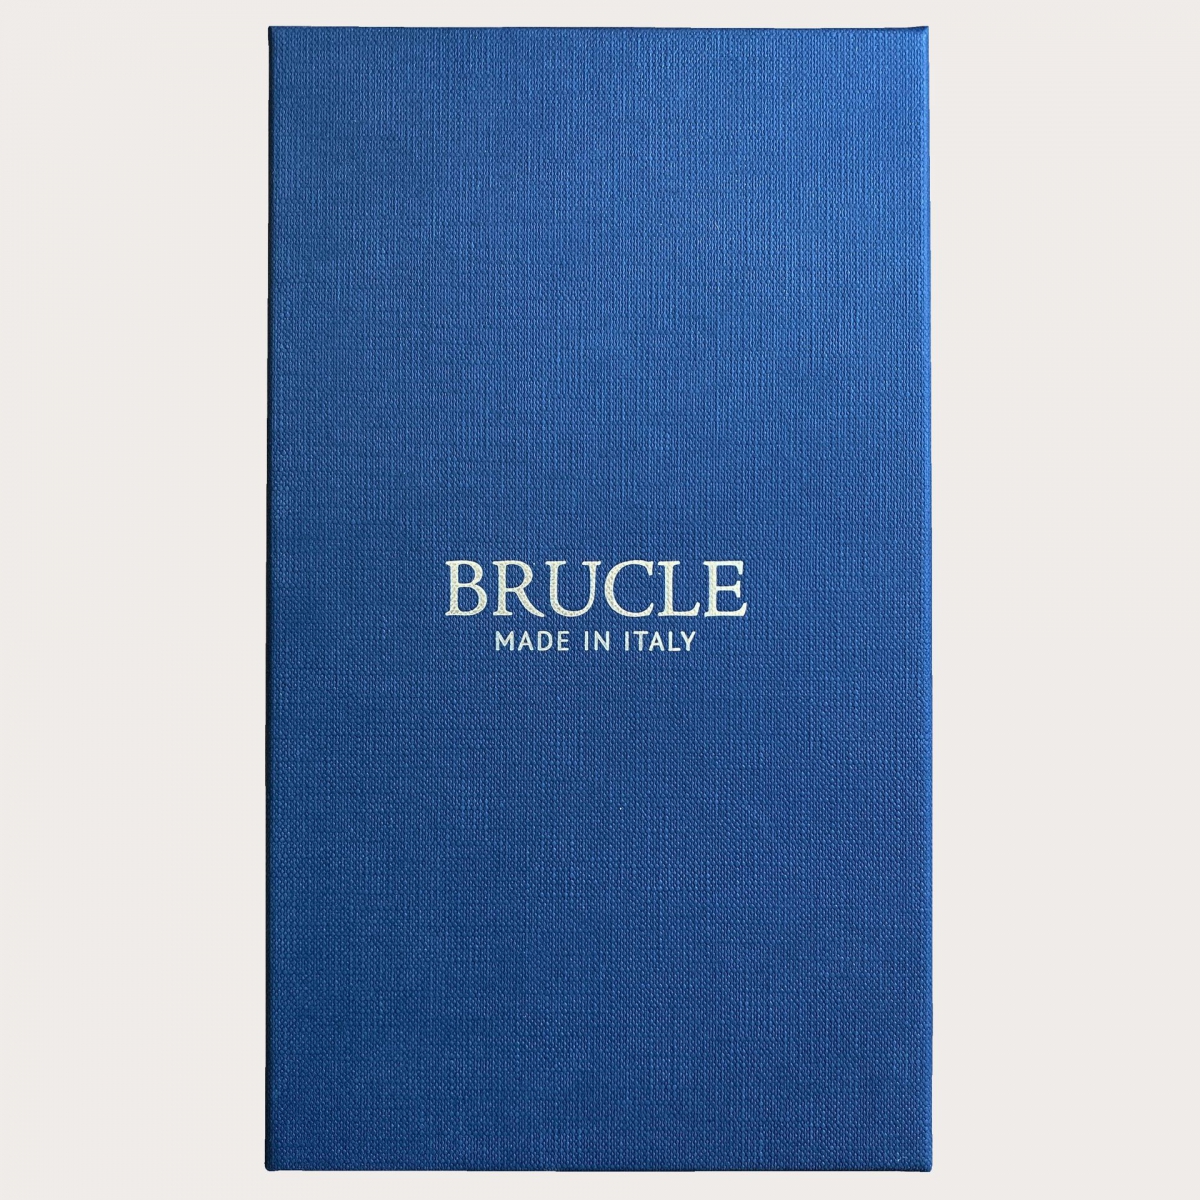 BRUCLE Y-shaped thin braces for men and women with stripes, blue and light blue